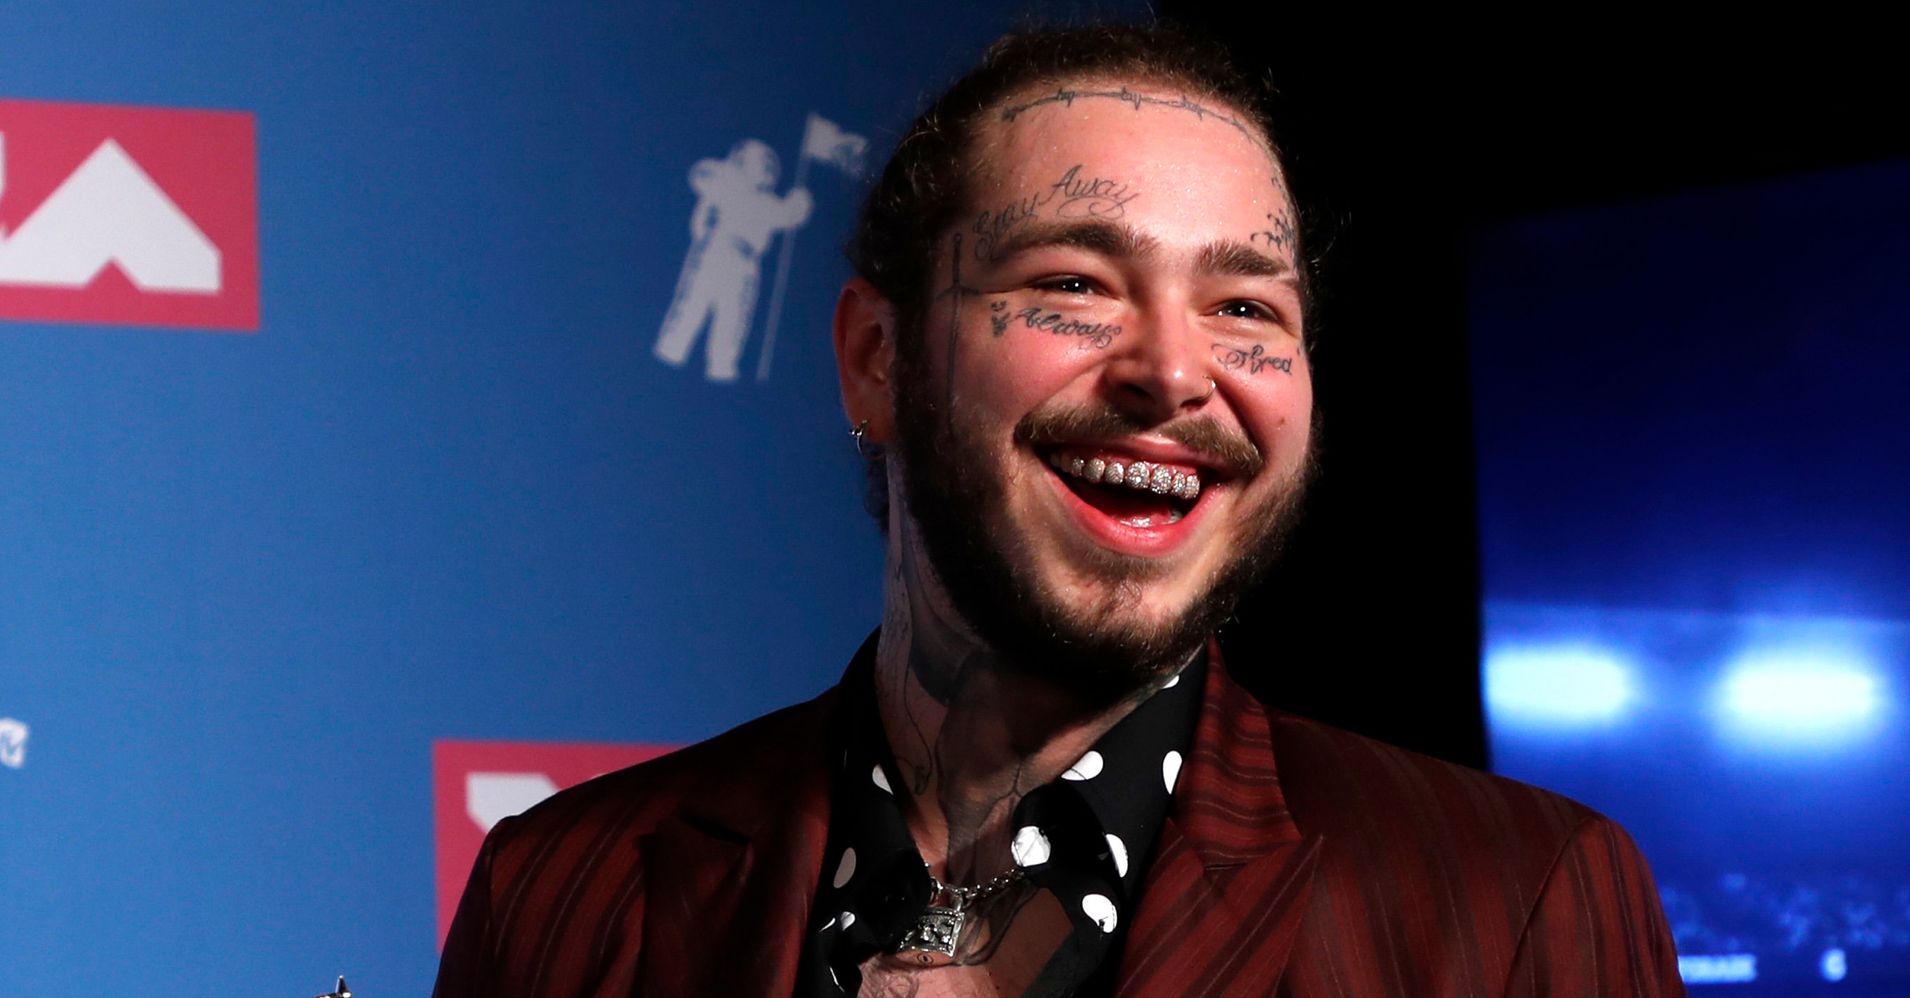 Plane Carrying Rapper Post Malone Has Emergency Landing After Losing ...